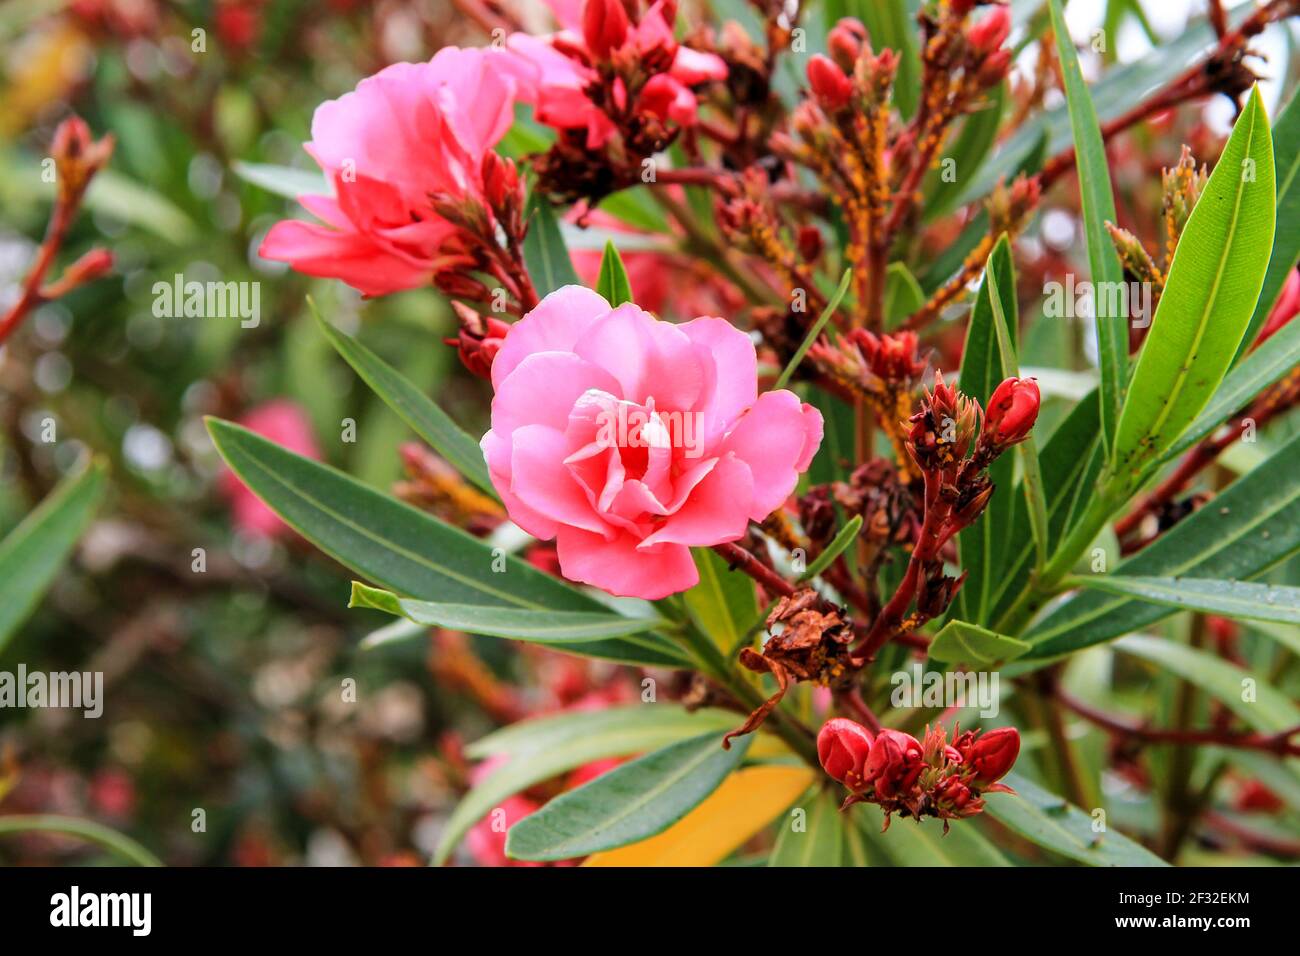 The best flowers of pink oleander, Nerium oleander, bloomed in the spring. Shrub, a small tree, cornel Apocynaceae family, garden plant. Red summer Stock Photo